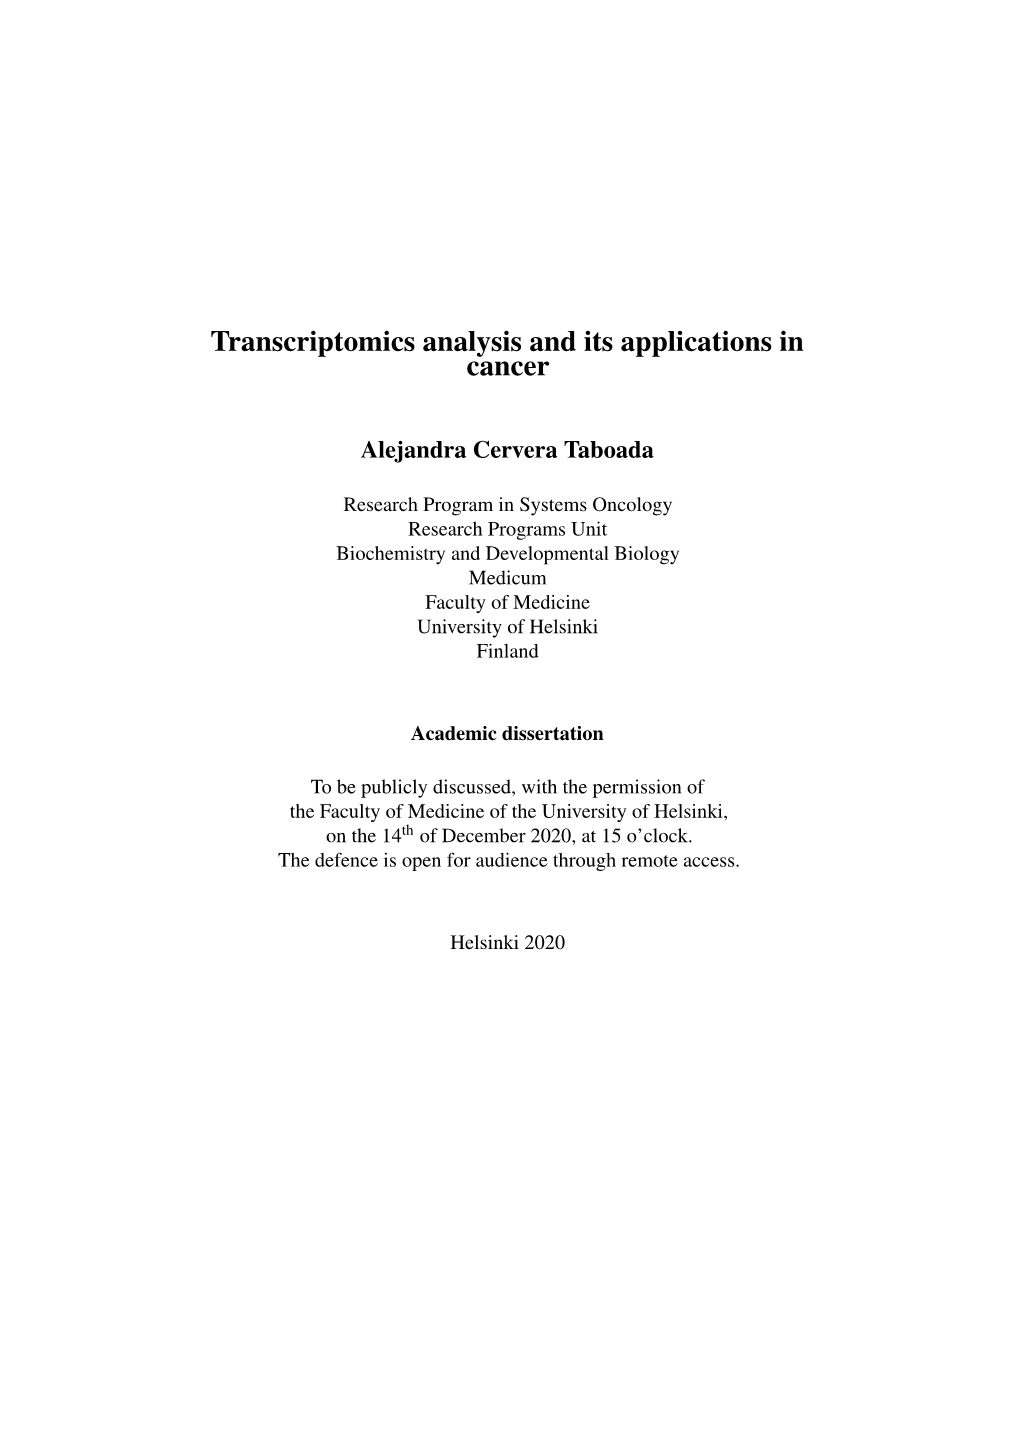 Transcriptomics Analysis and Its Applications in Cancer